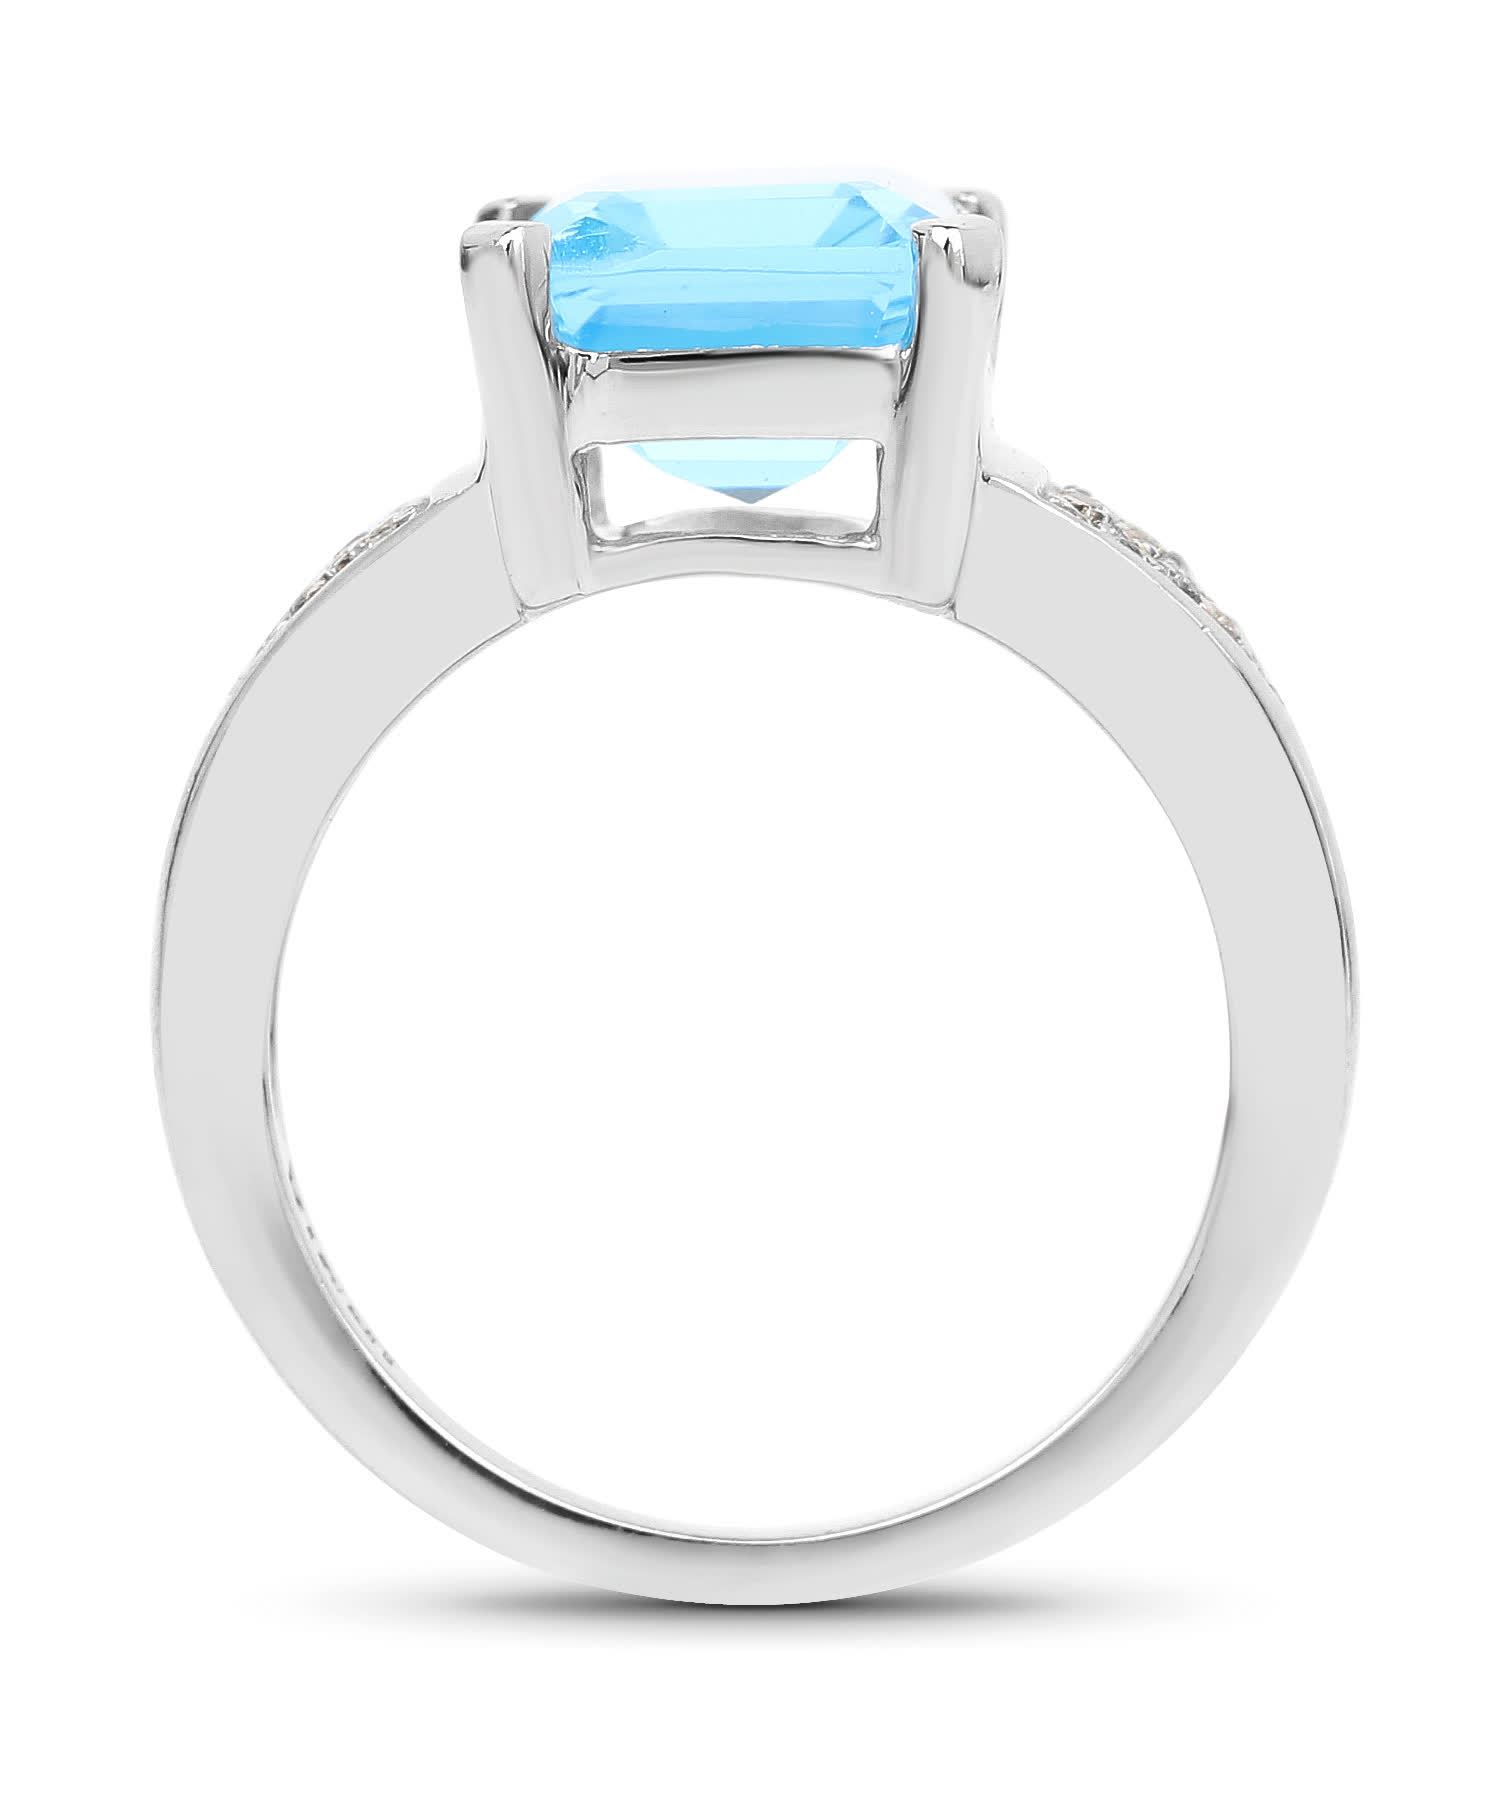 5.85ctw Natural Swiss Blue Topaz Rhodium Plated 925 Sterling Silver Cocktail Ring View 2